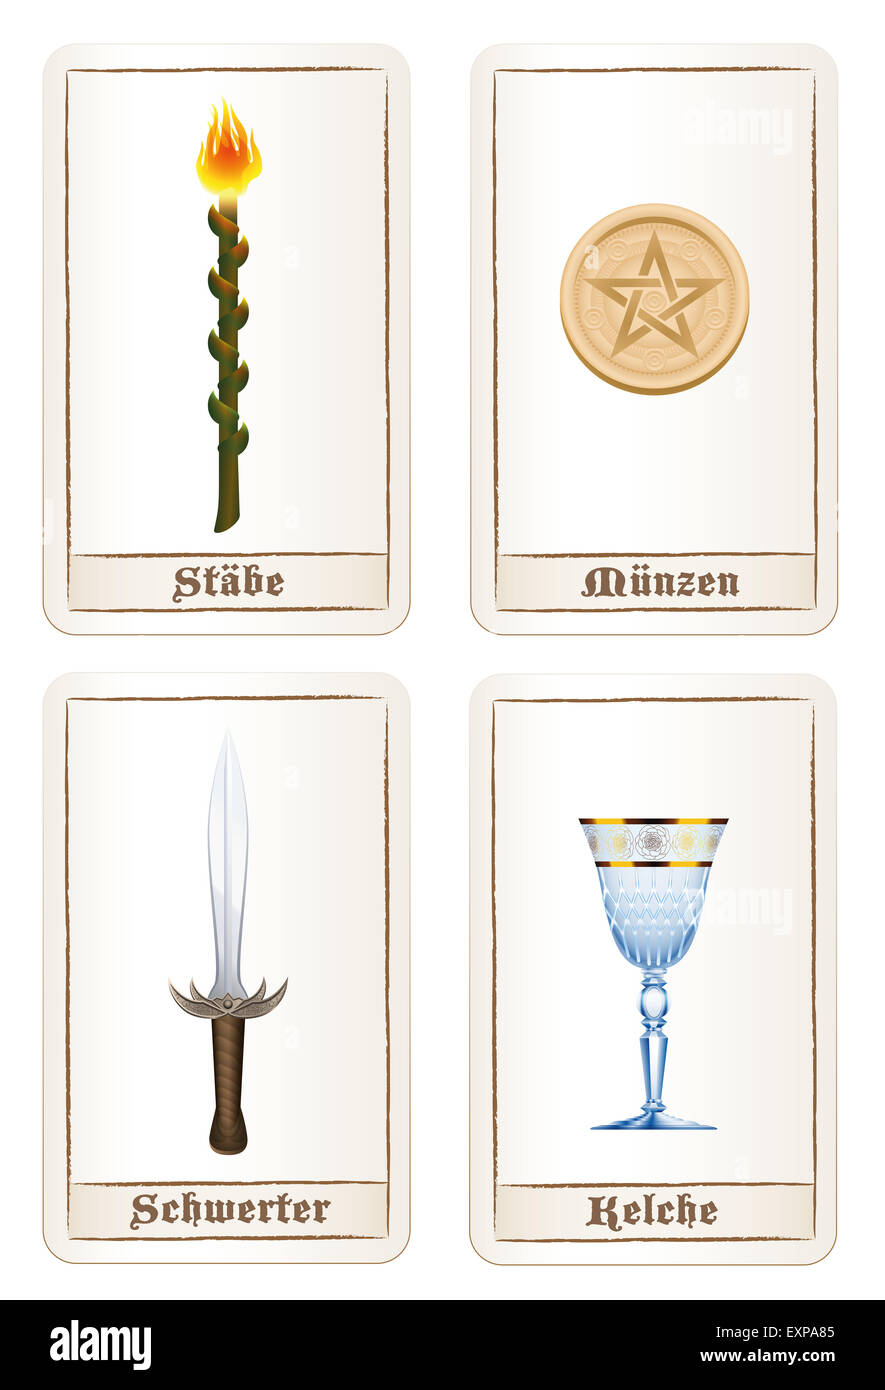 Tarot card colors or elements - suit of wands, suit of pentacles, suit of swords and suit of cups. GERMAN LABELING! Stock Photo